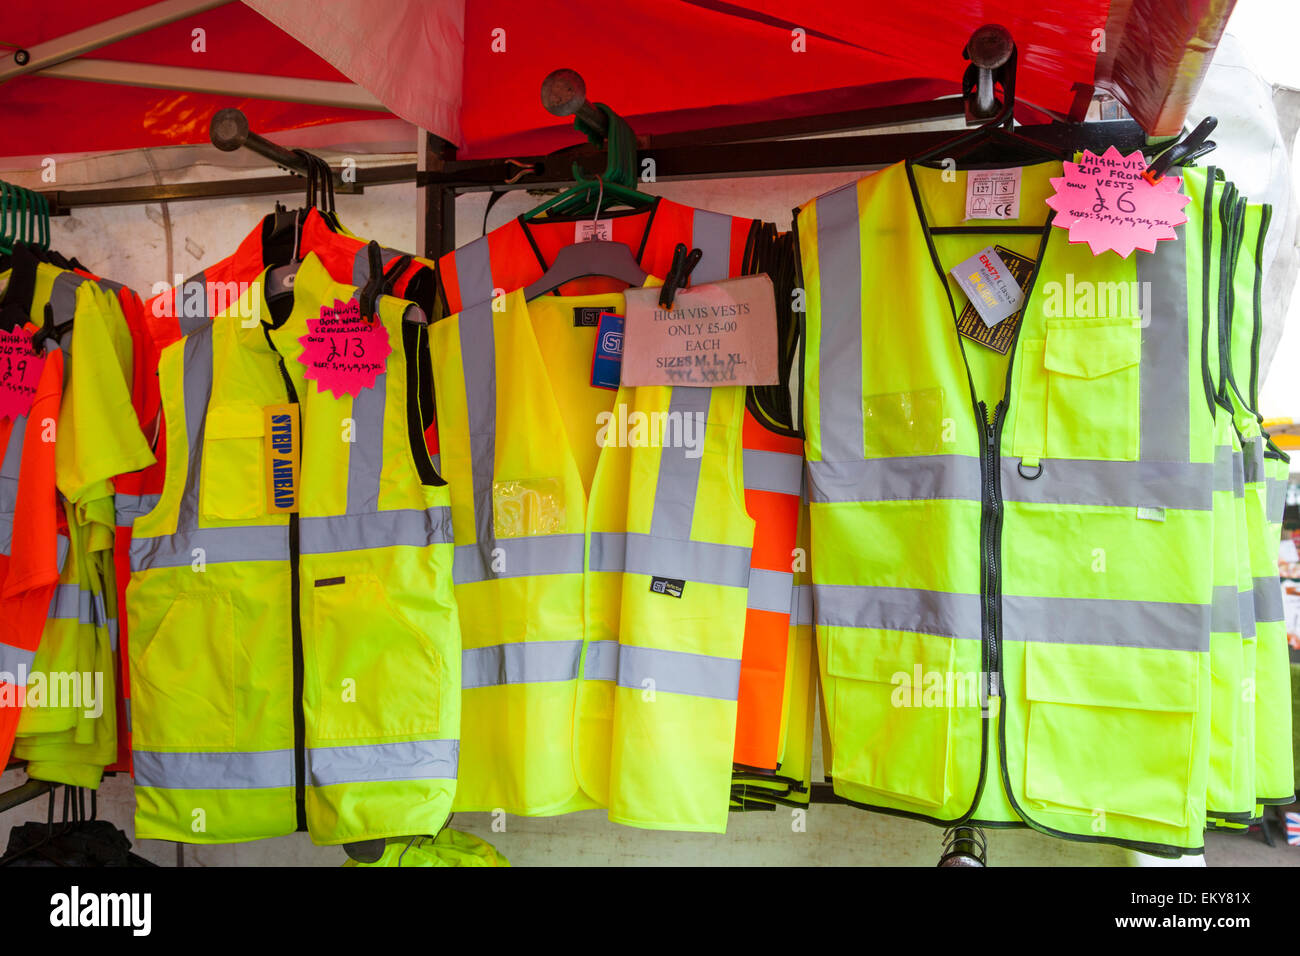 Hi-viz jackets and vests for sale hanging in a market stall, Loughborough. Stock Photo